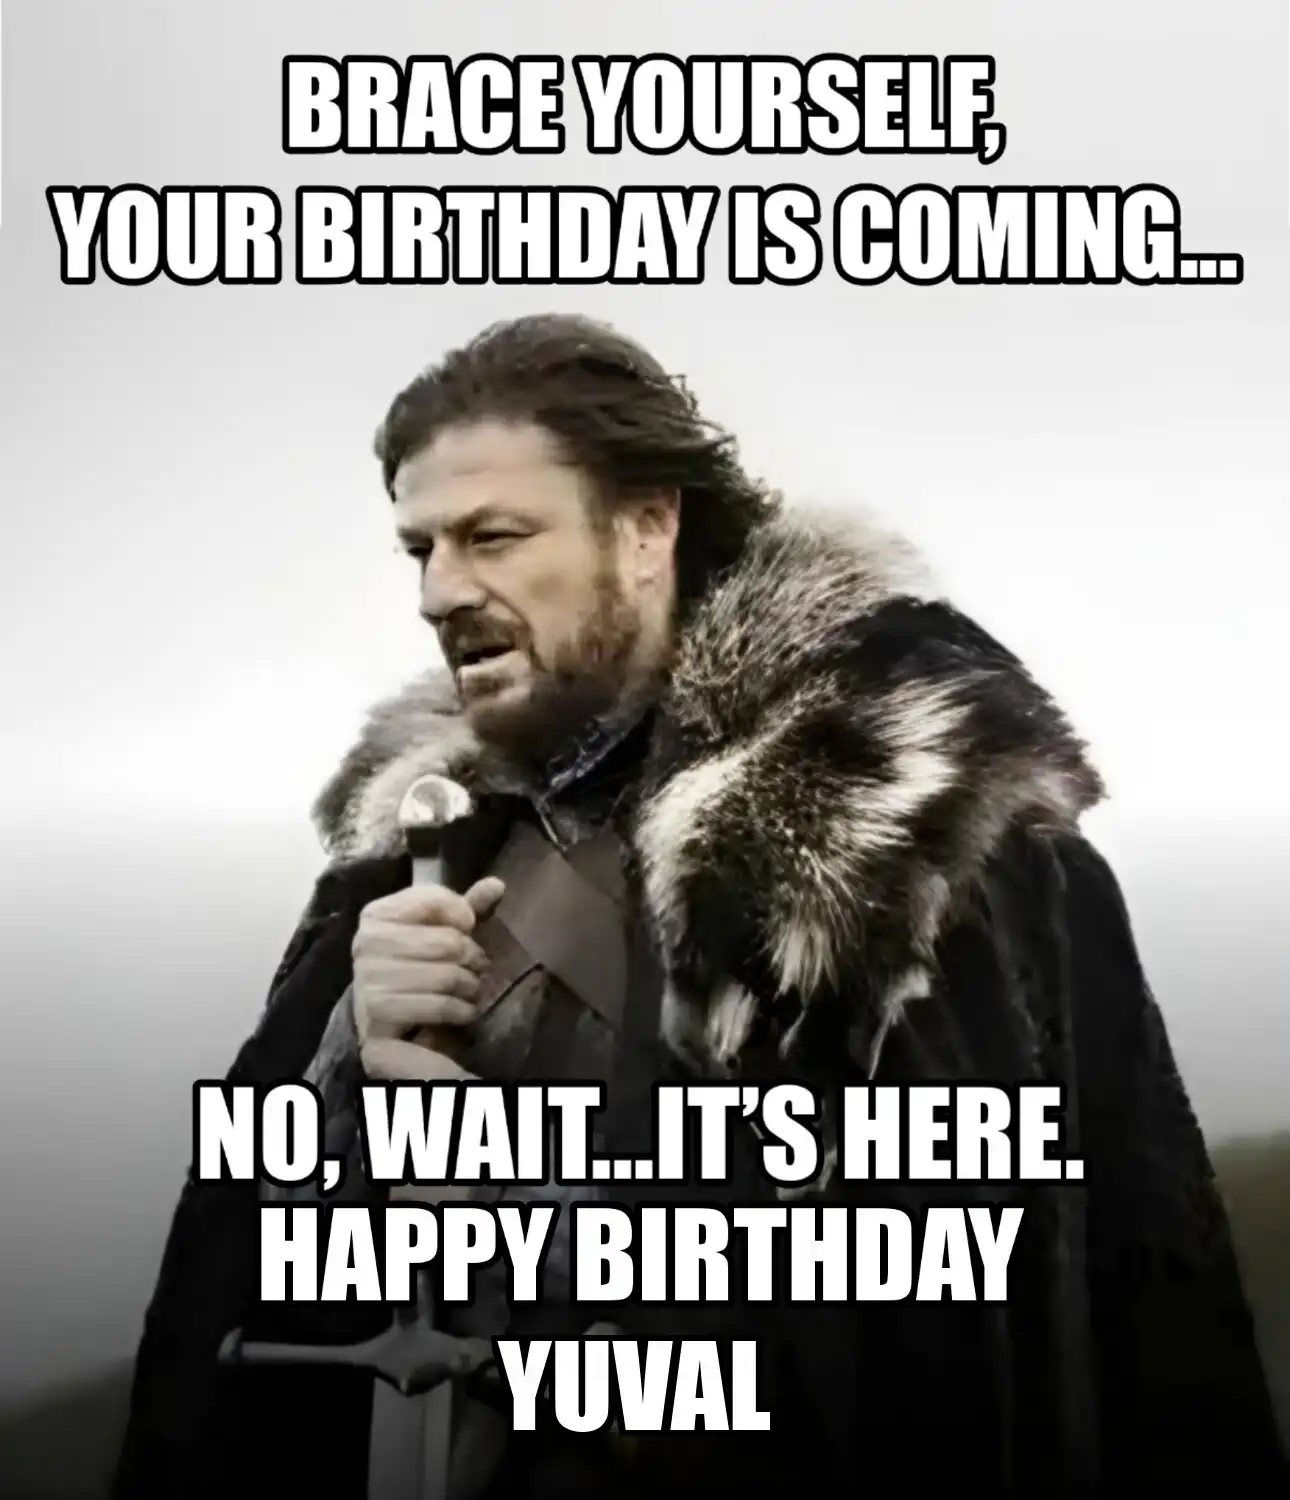 Happy Birthday Yuval Brace Yourself Your Birthday Is Coming Meme